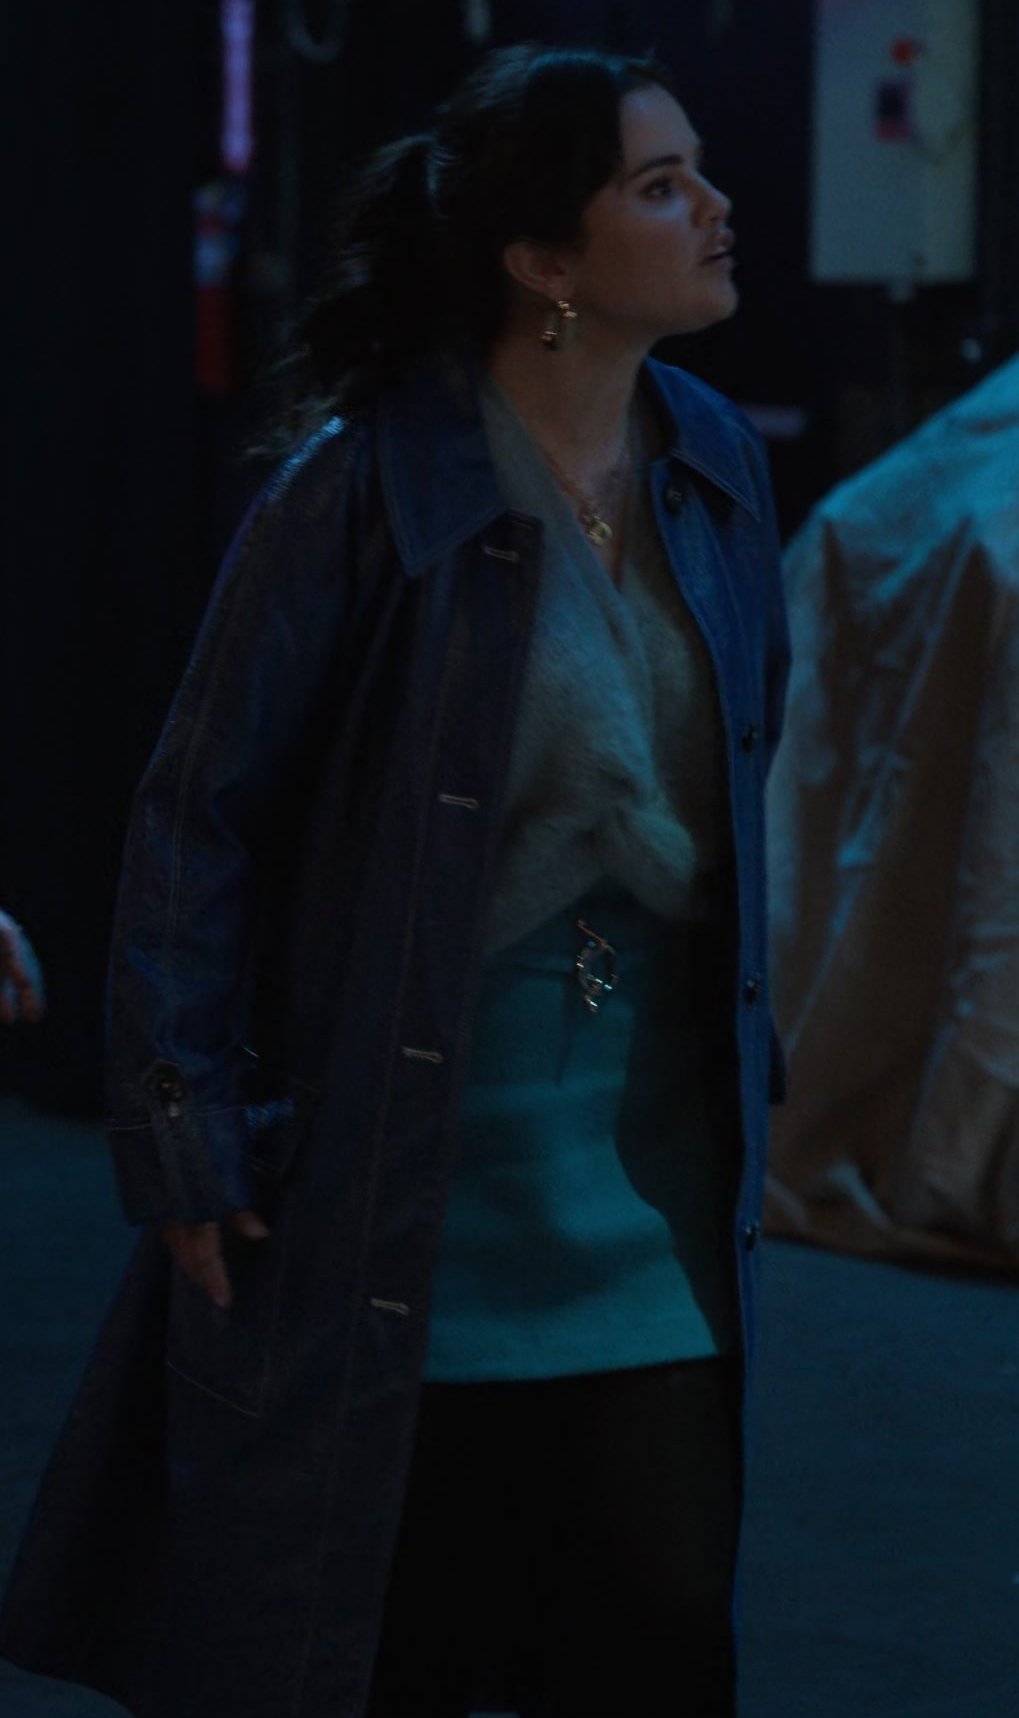 Worn on Only Murders in the Building TV Show - Blue A-Line Mini Skirt of Selena Gomez as Mabel Mora